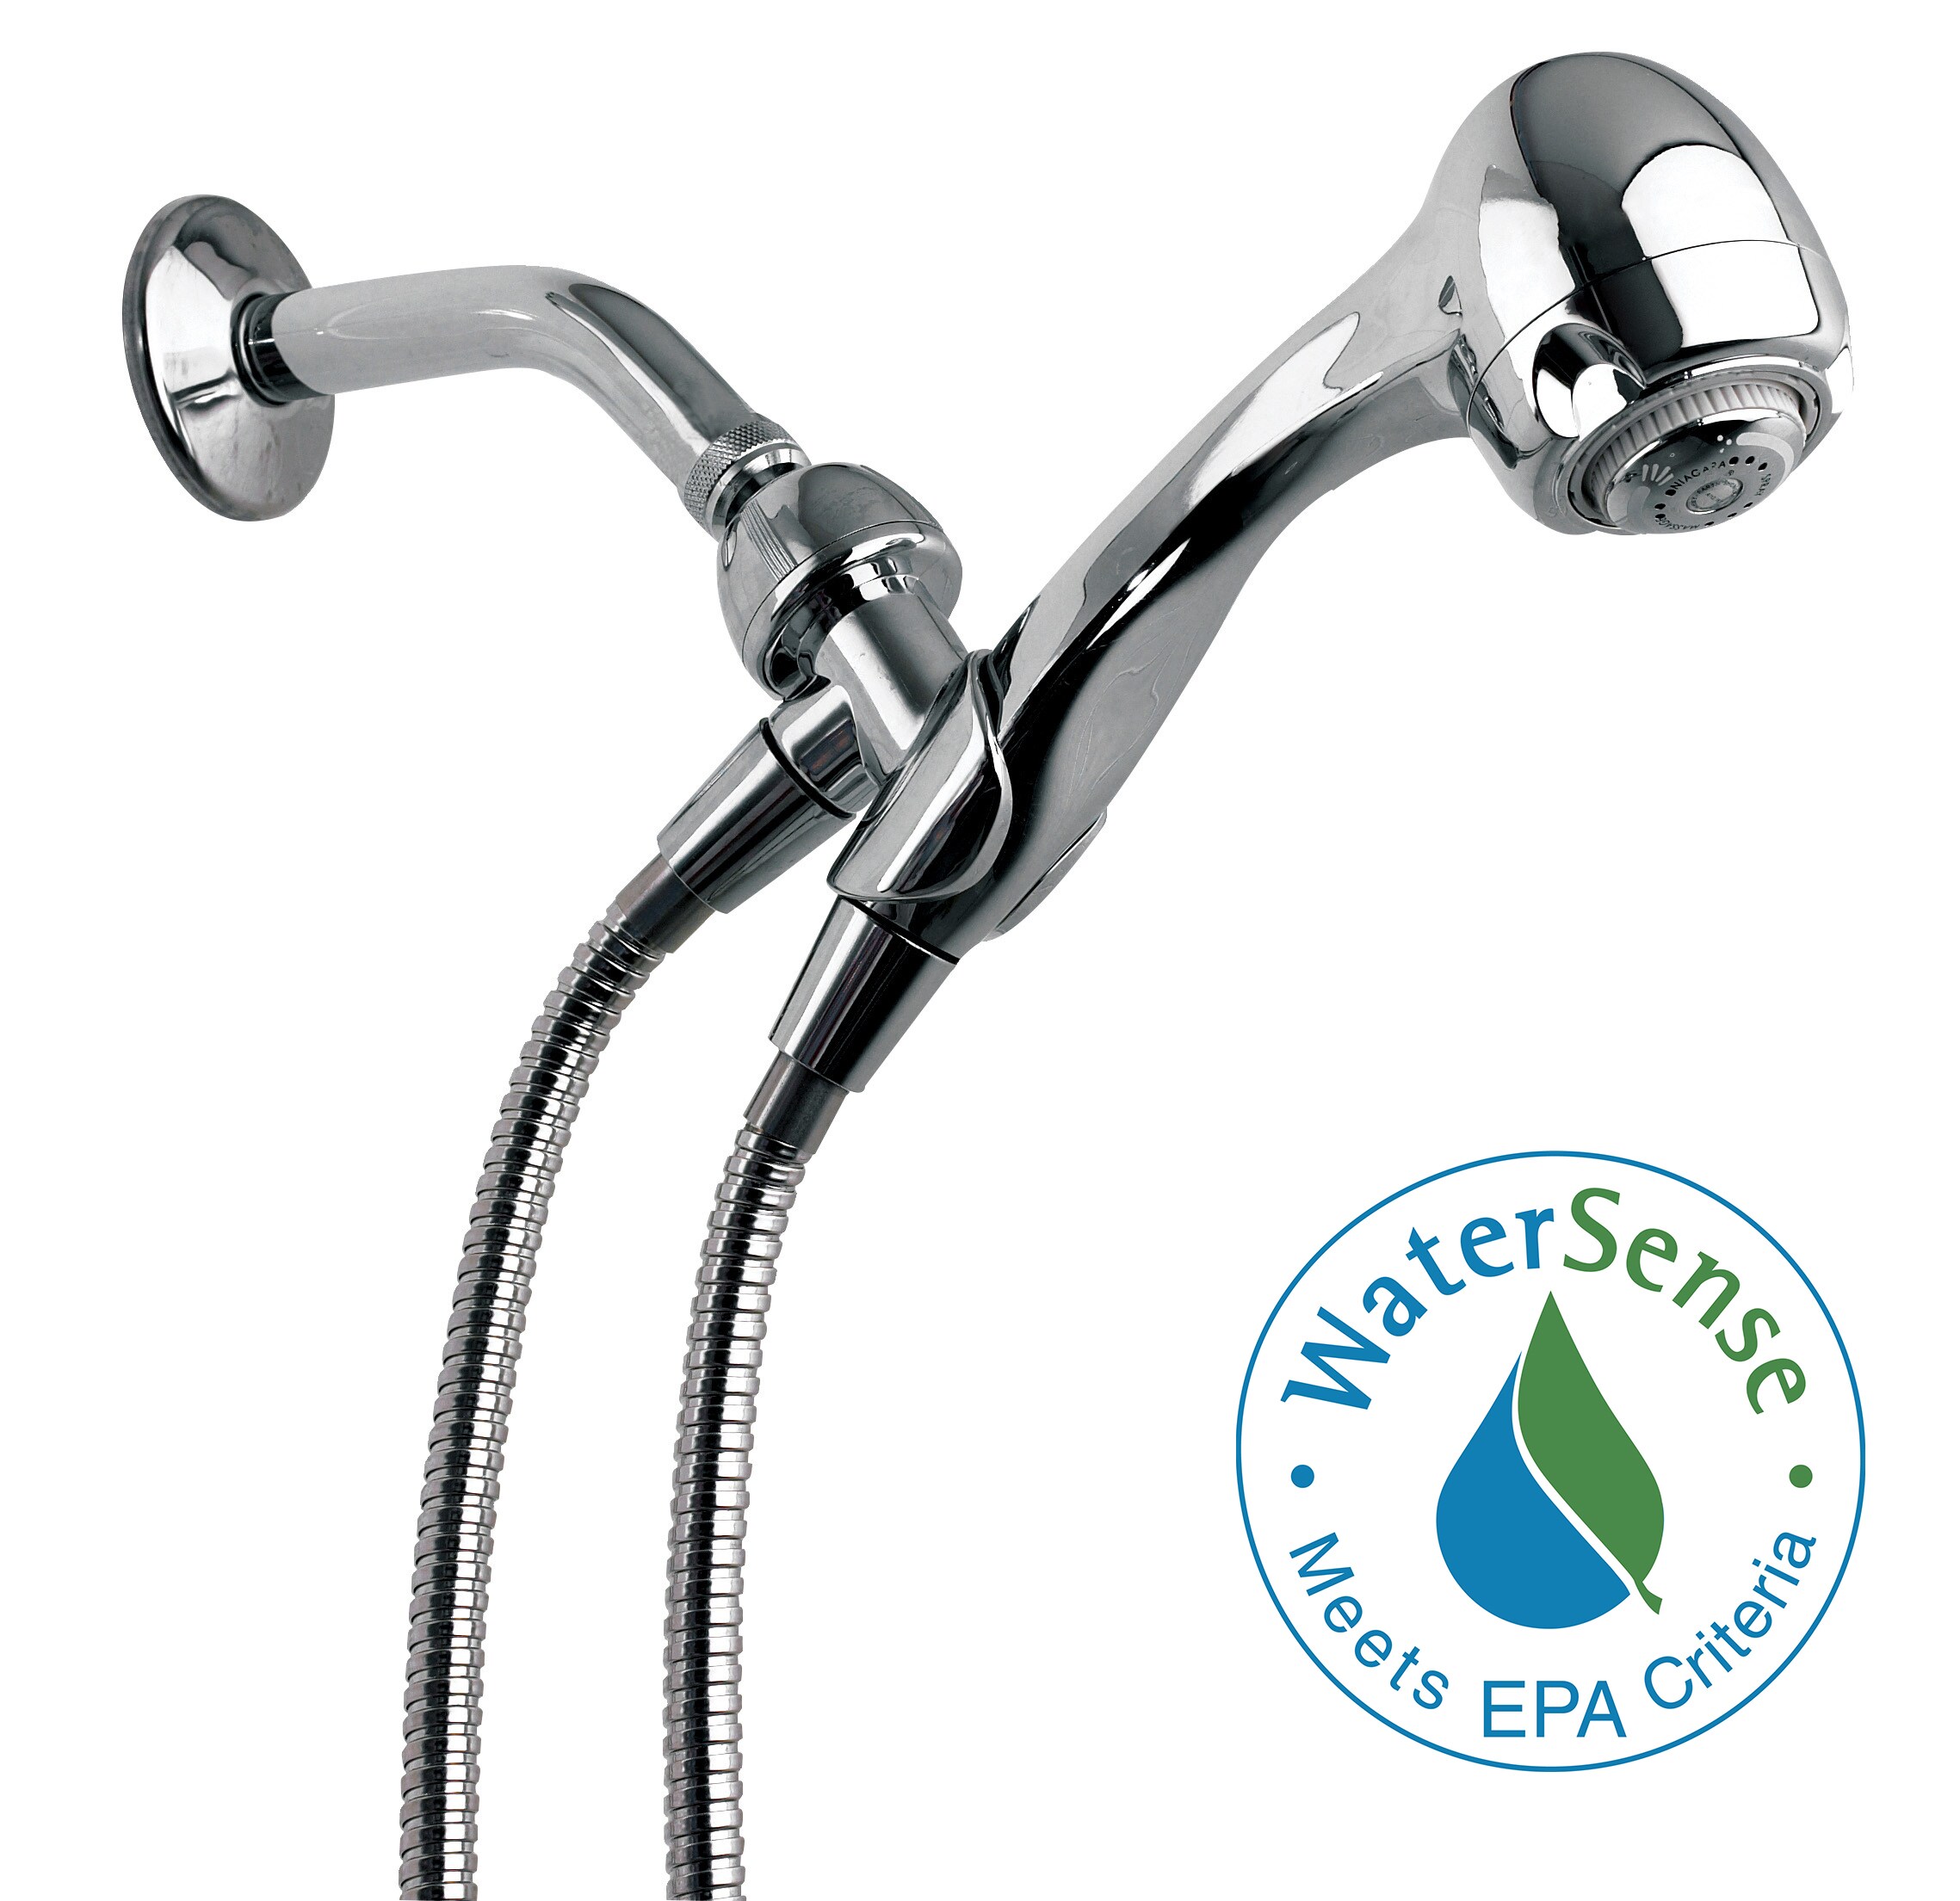 Niagara Conservation Earth 1.5-GPM Chrome Handheld Shower (12-Pack) 1.5-GPM (5.7-LPM)